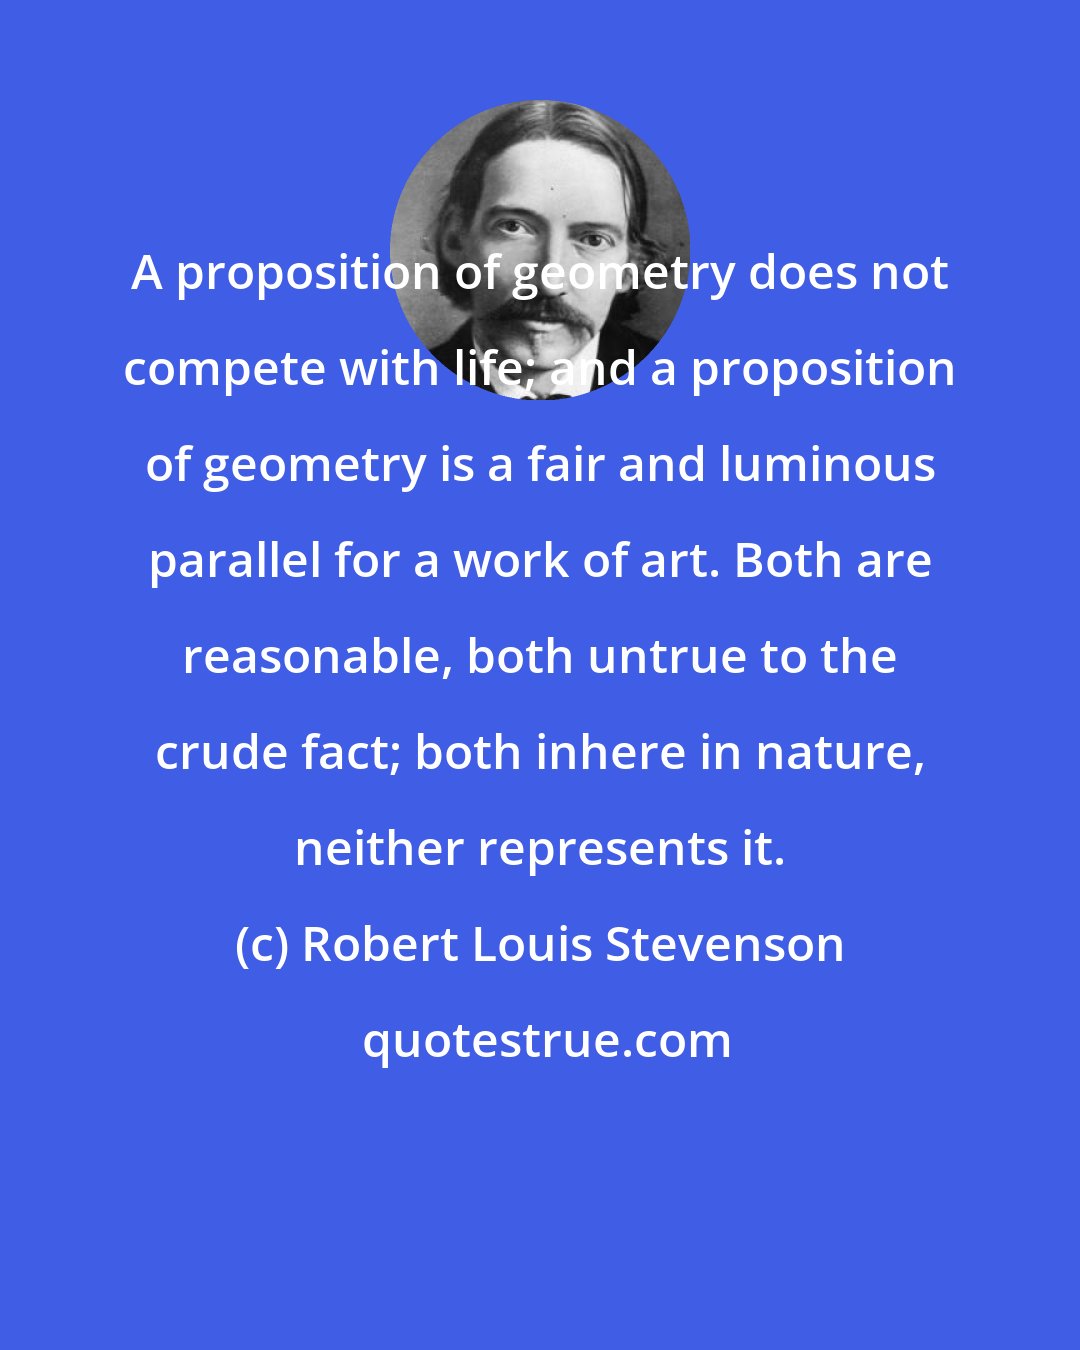 Robert Louis Stevenson: A proposition of geometry does not compete with life; and a proposition of geometry is a fair and luminous parallel for a work of art. Both are reasonable, both untrue to the crude fact; both inhere in nature, neither represents it.